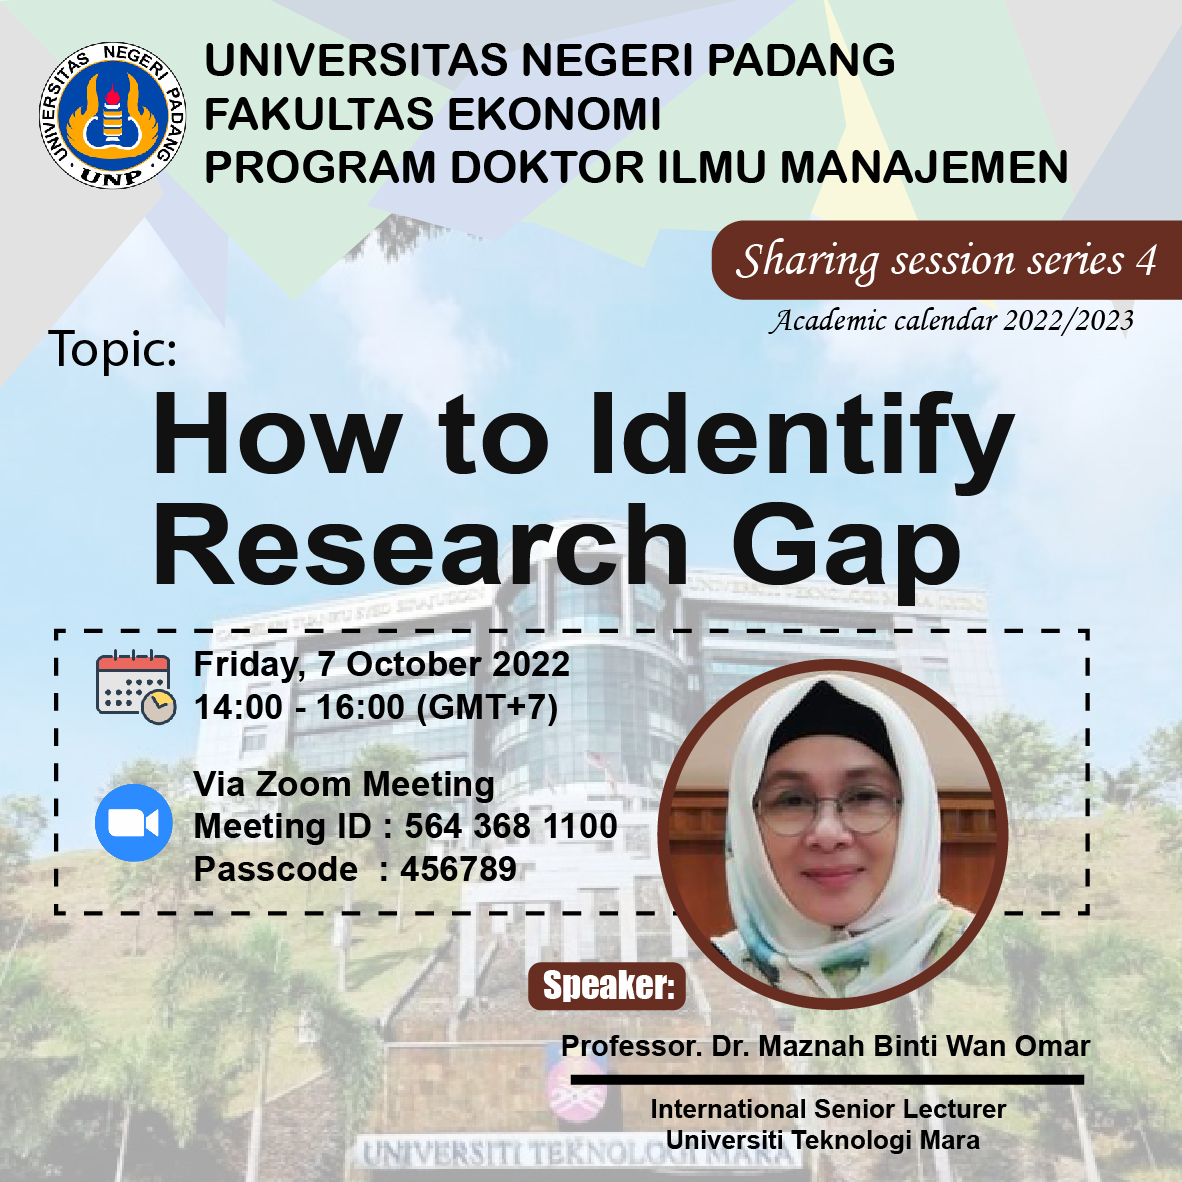 Sharing Session 4 with Prof. Dr. Maznah Binti Wan Omar